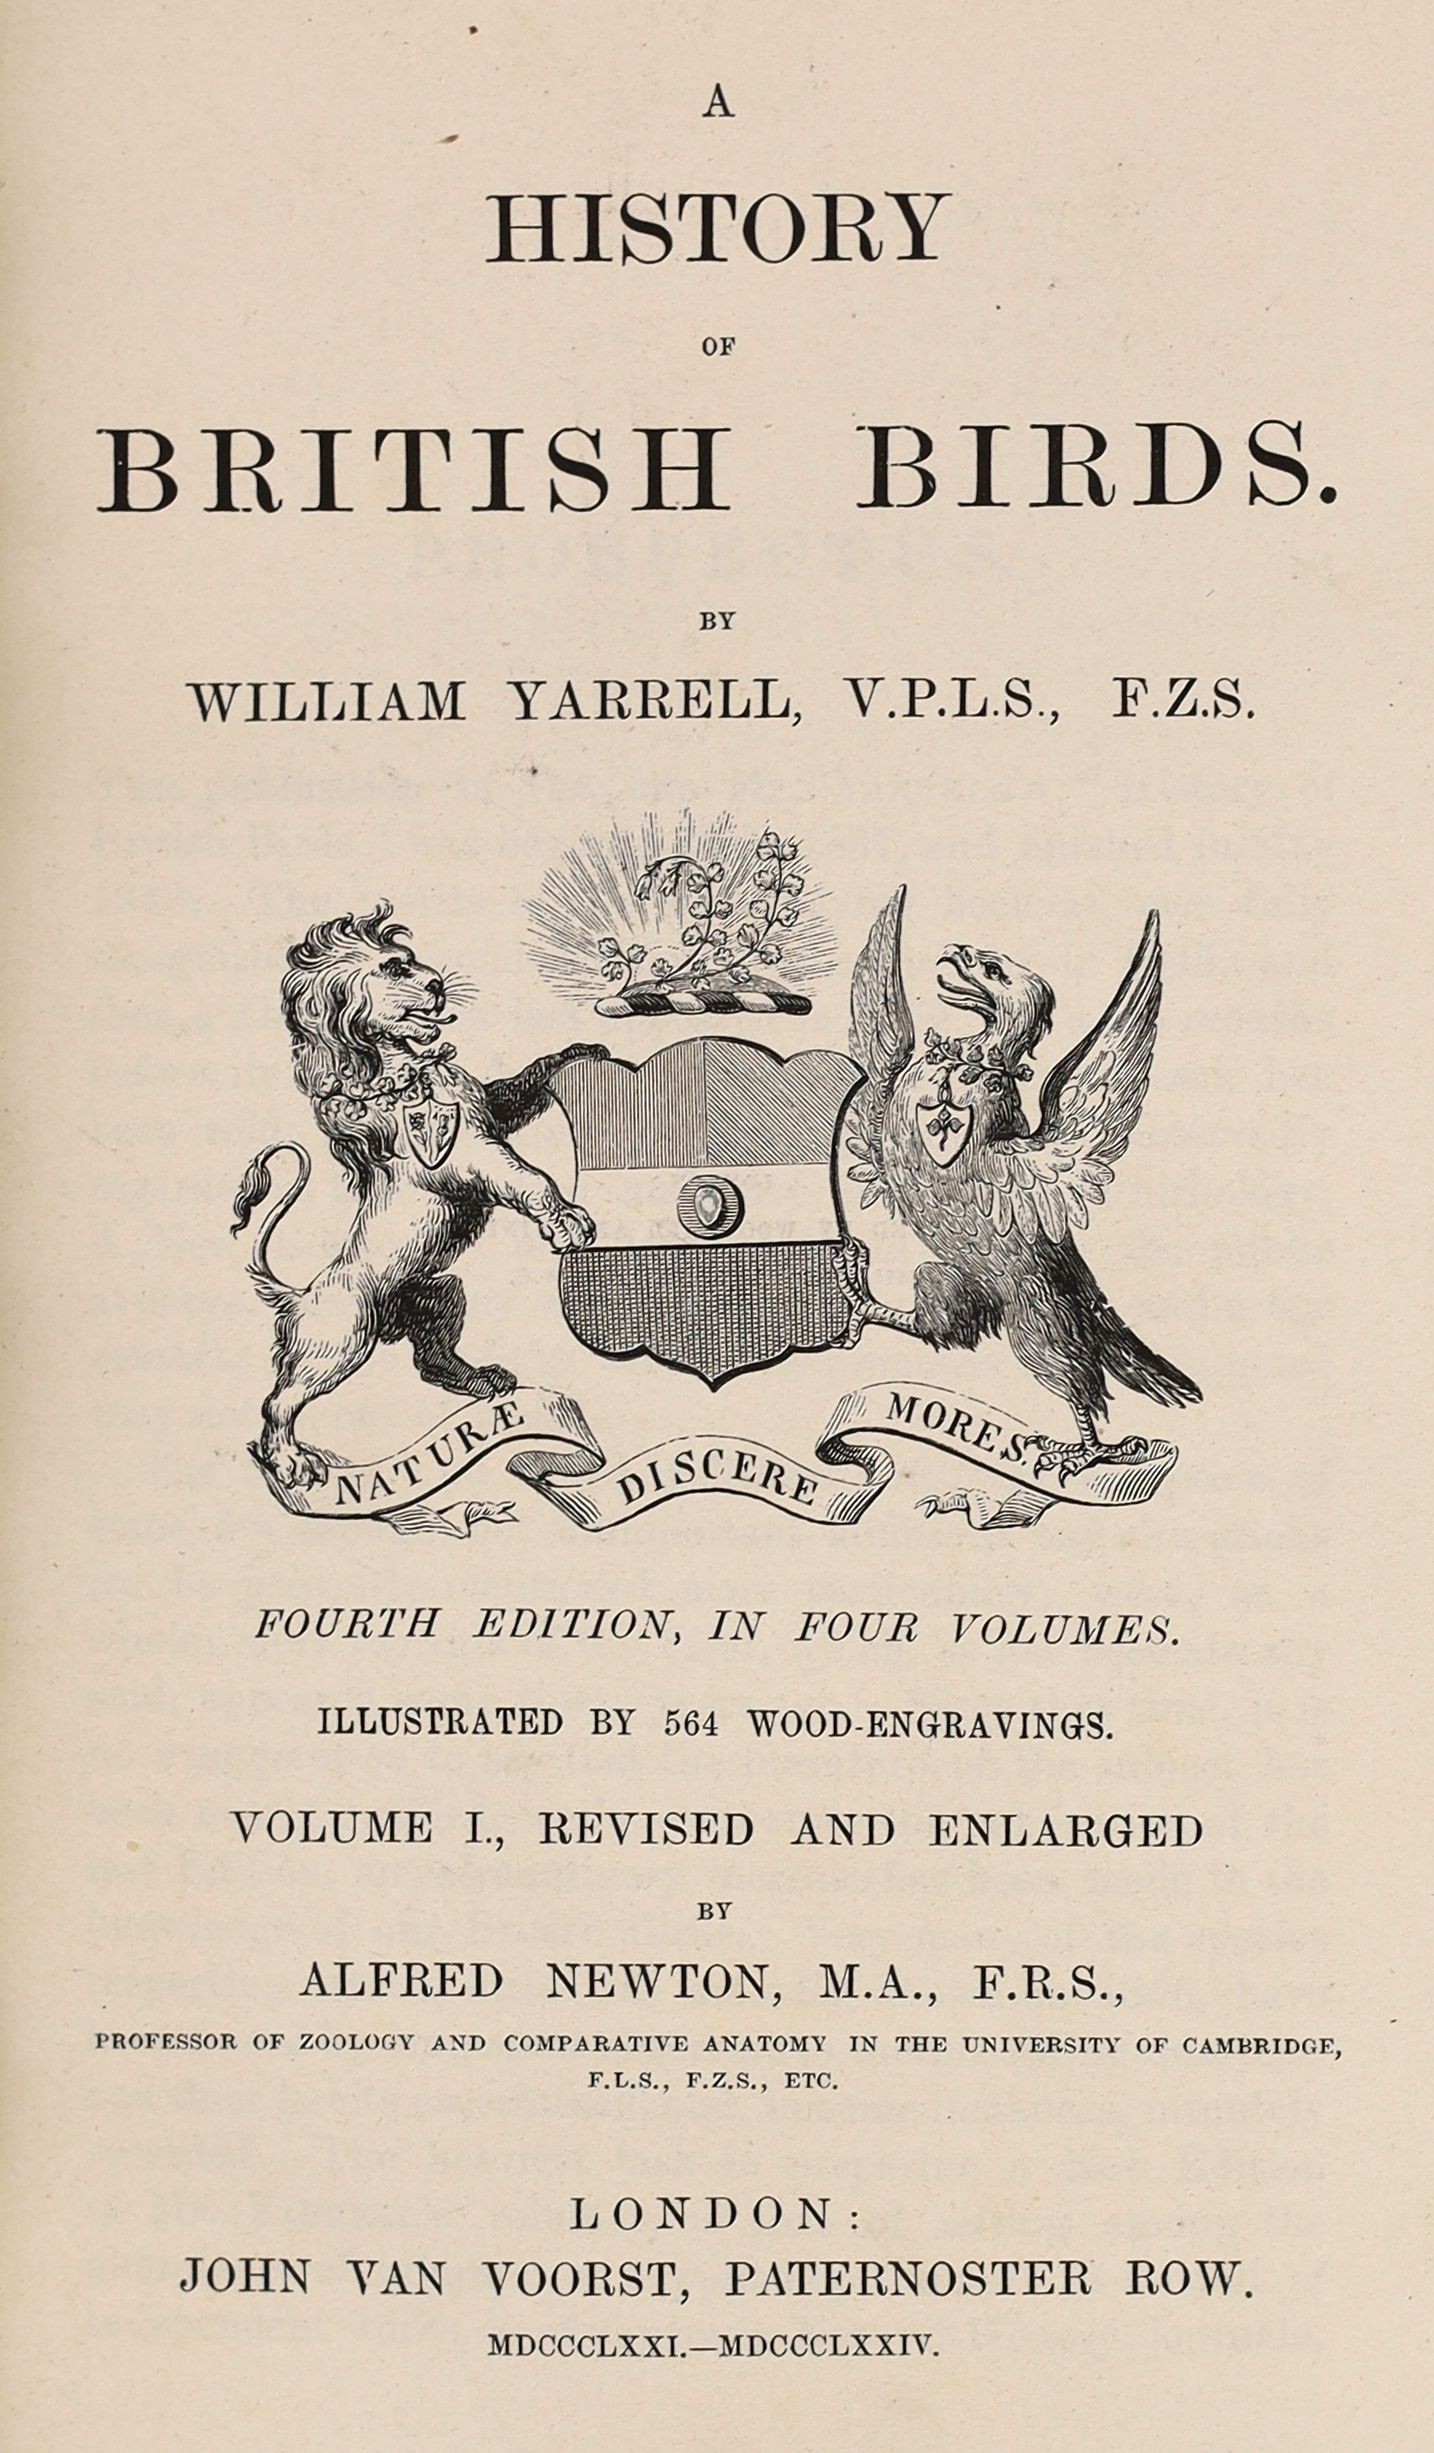 Yarrell, William - A History of British Birds, 4th edition, 4 vols, 8vo, half green morocco gilt, with 564 wood-engravings, John van Voorst, London, 1871-85